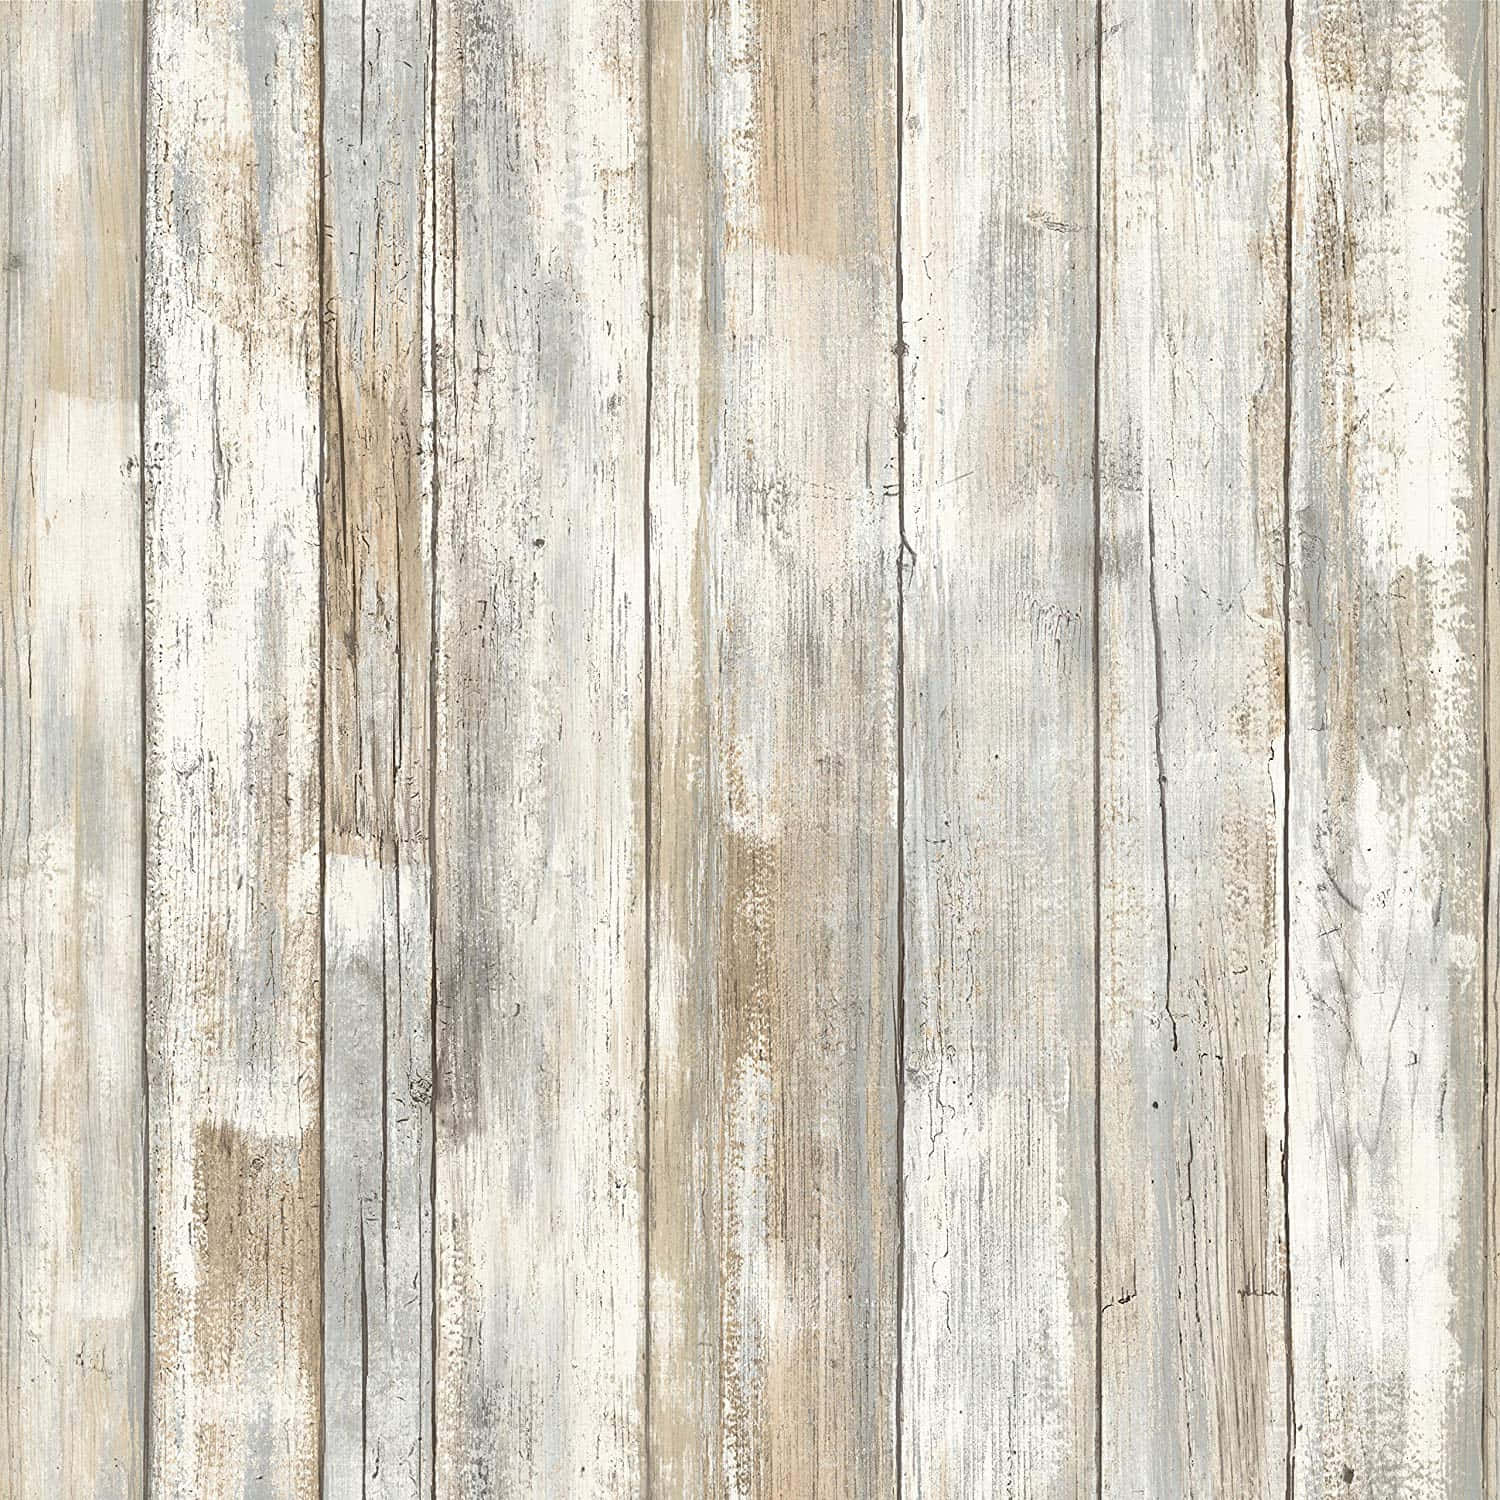 Rustic Wood Background White Wooden Texture